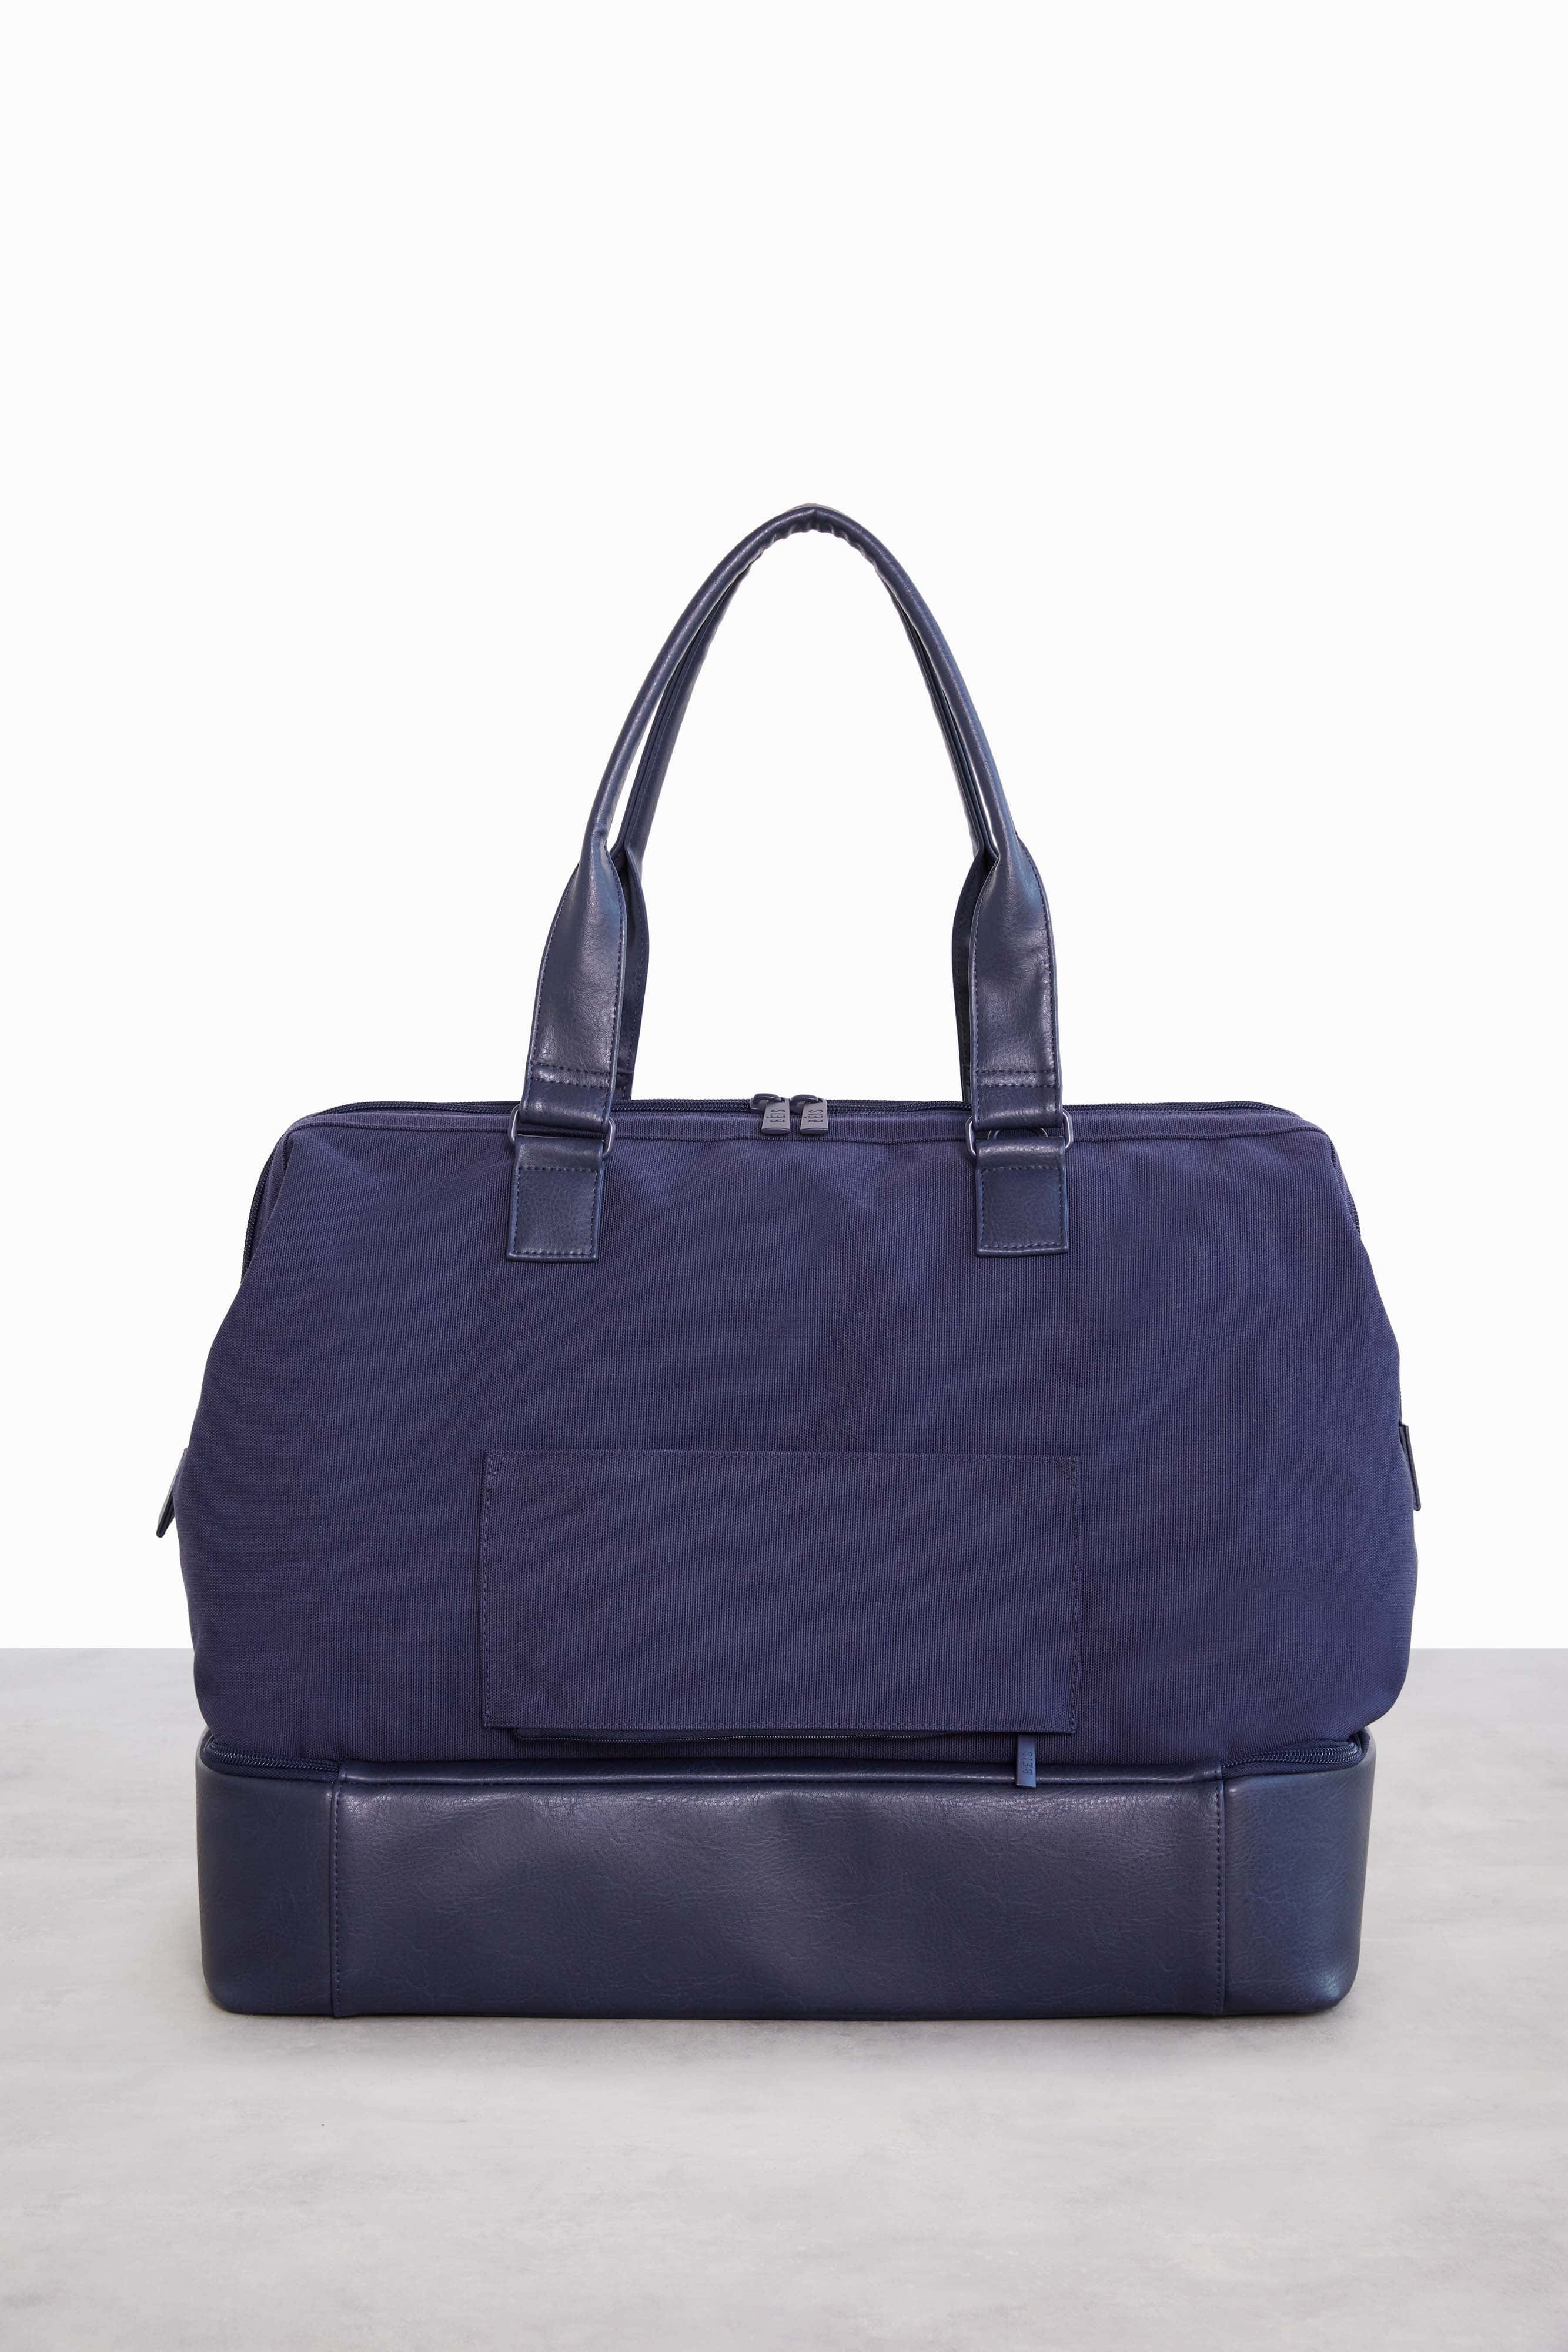 The Béis Weekender Bag Is My New Favorite Piece of Luggage | Condé Nast  Traveler